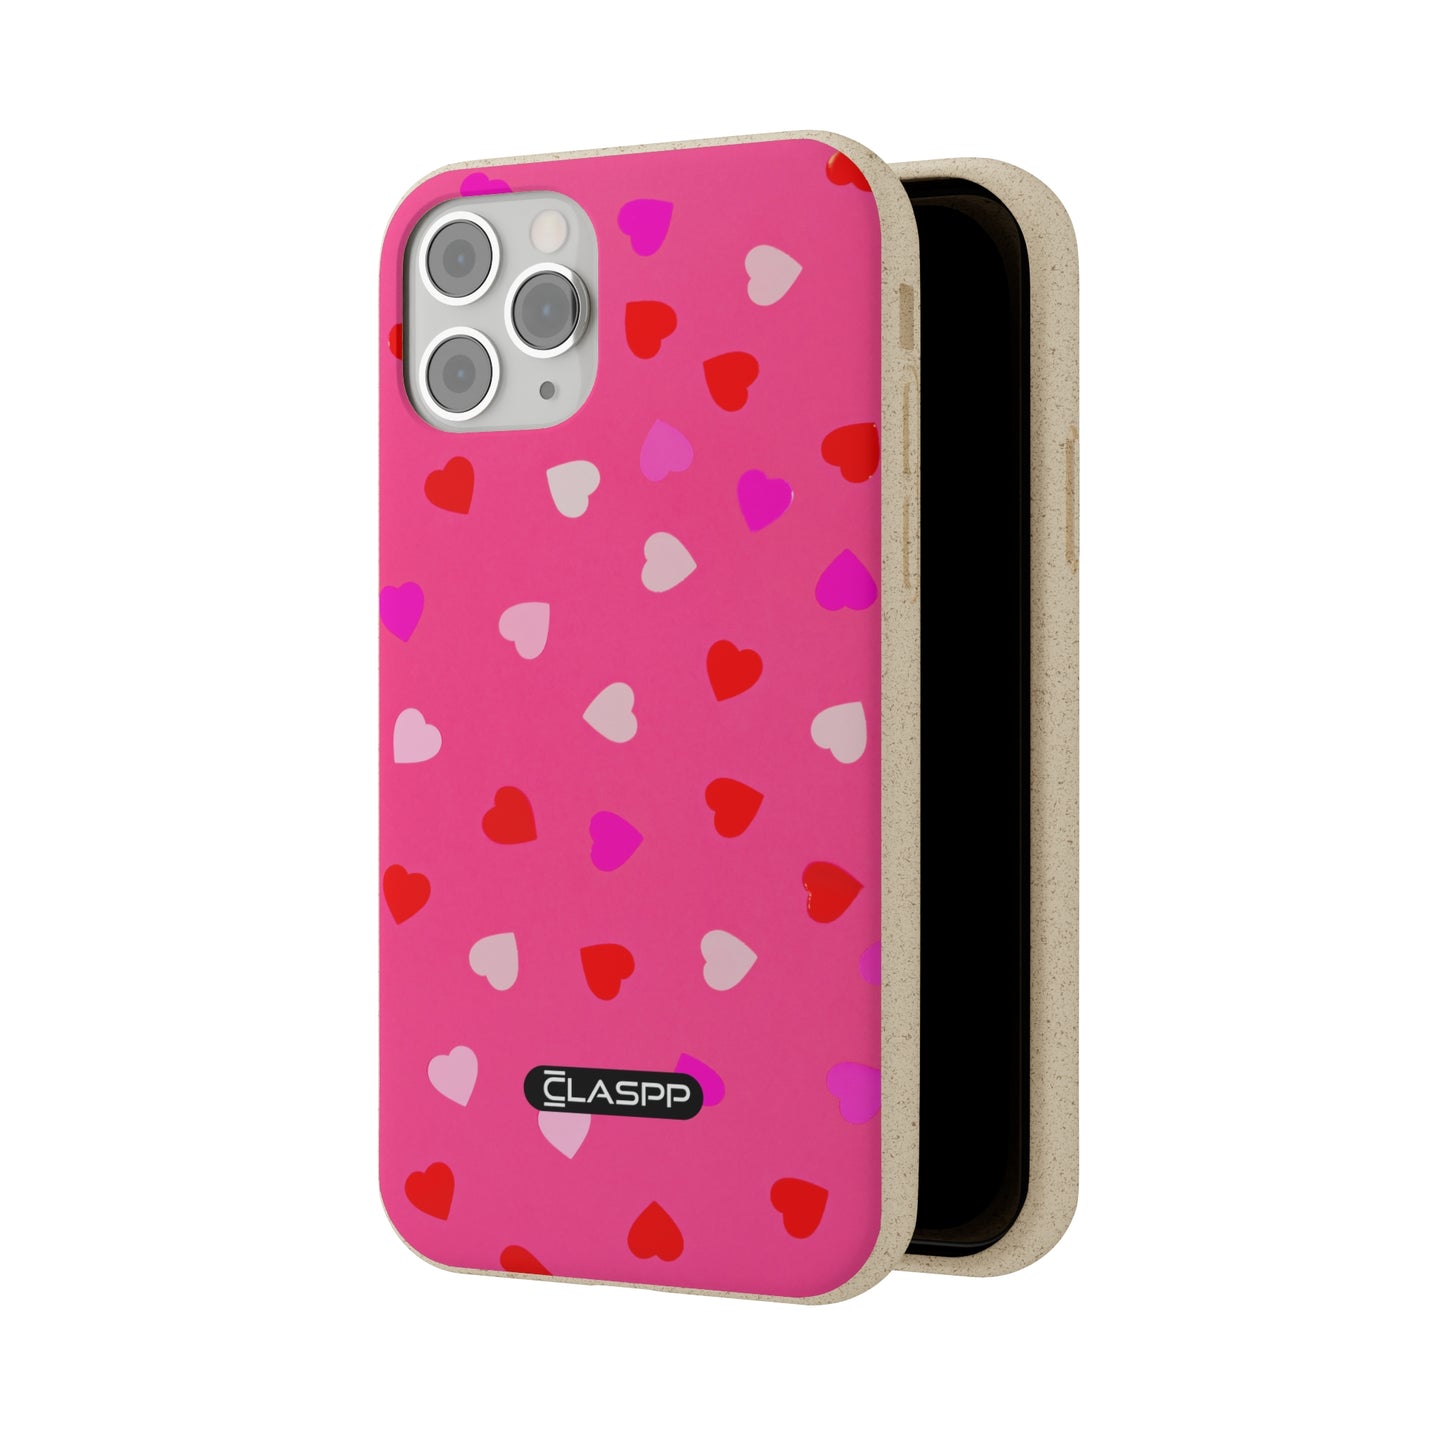 Juliet | Valentine's Day | Protective Biodegradable Phone Case